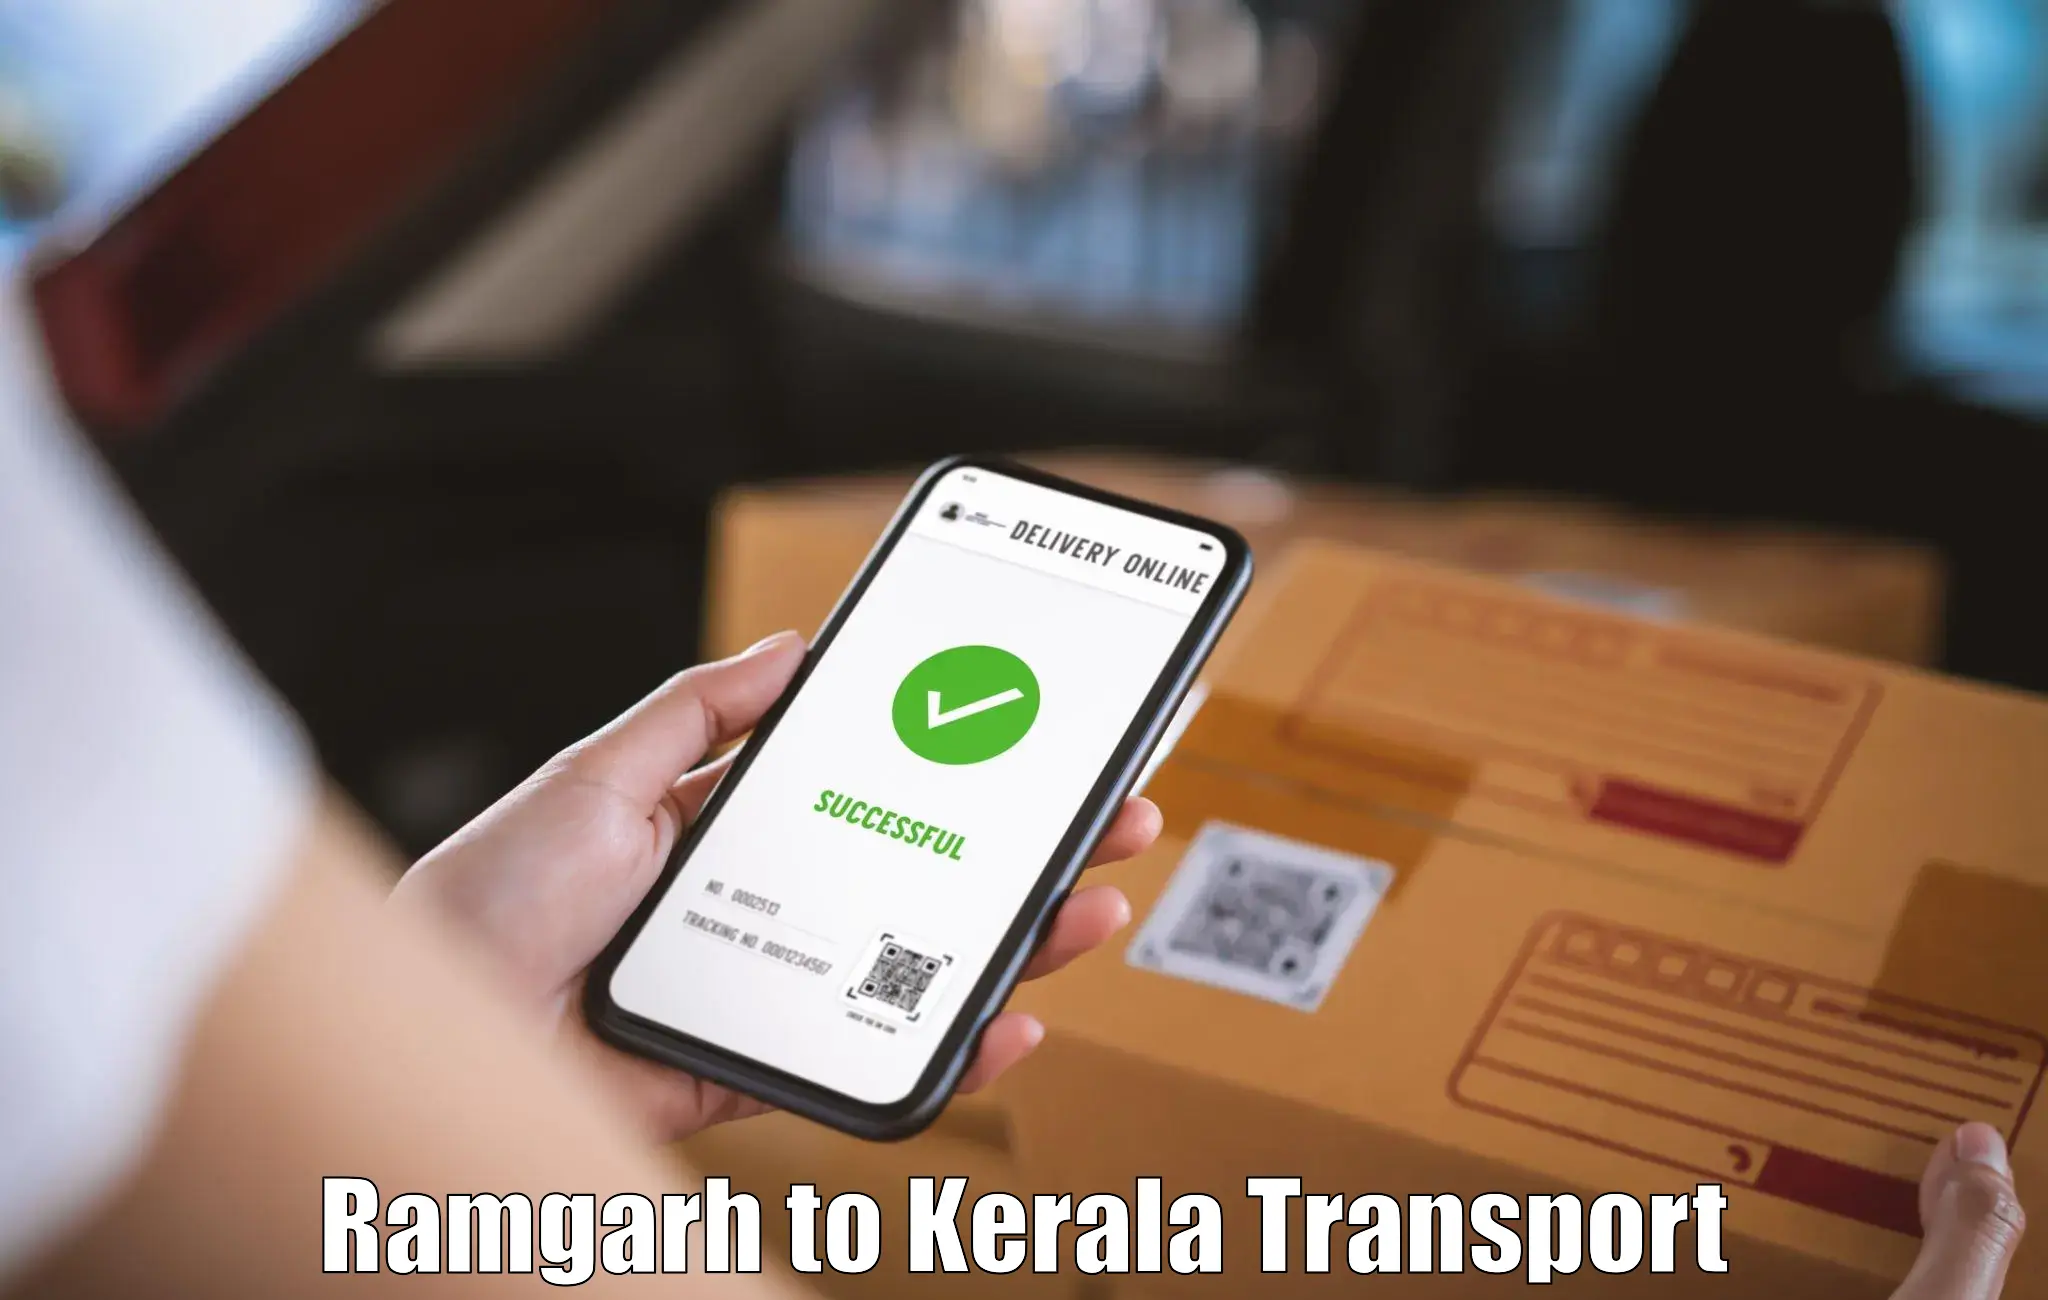 Air cargo transport services Ramgarh to Munnar